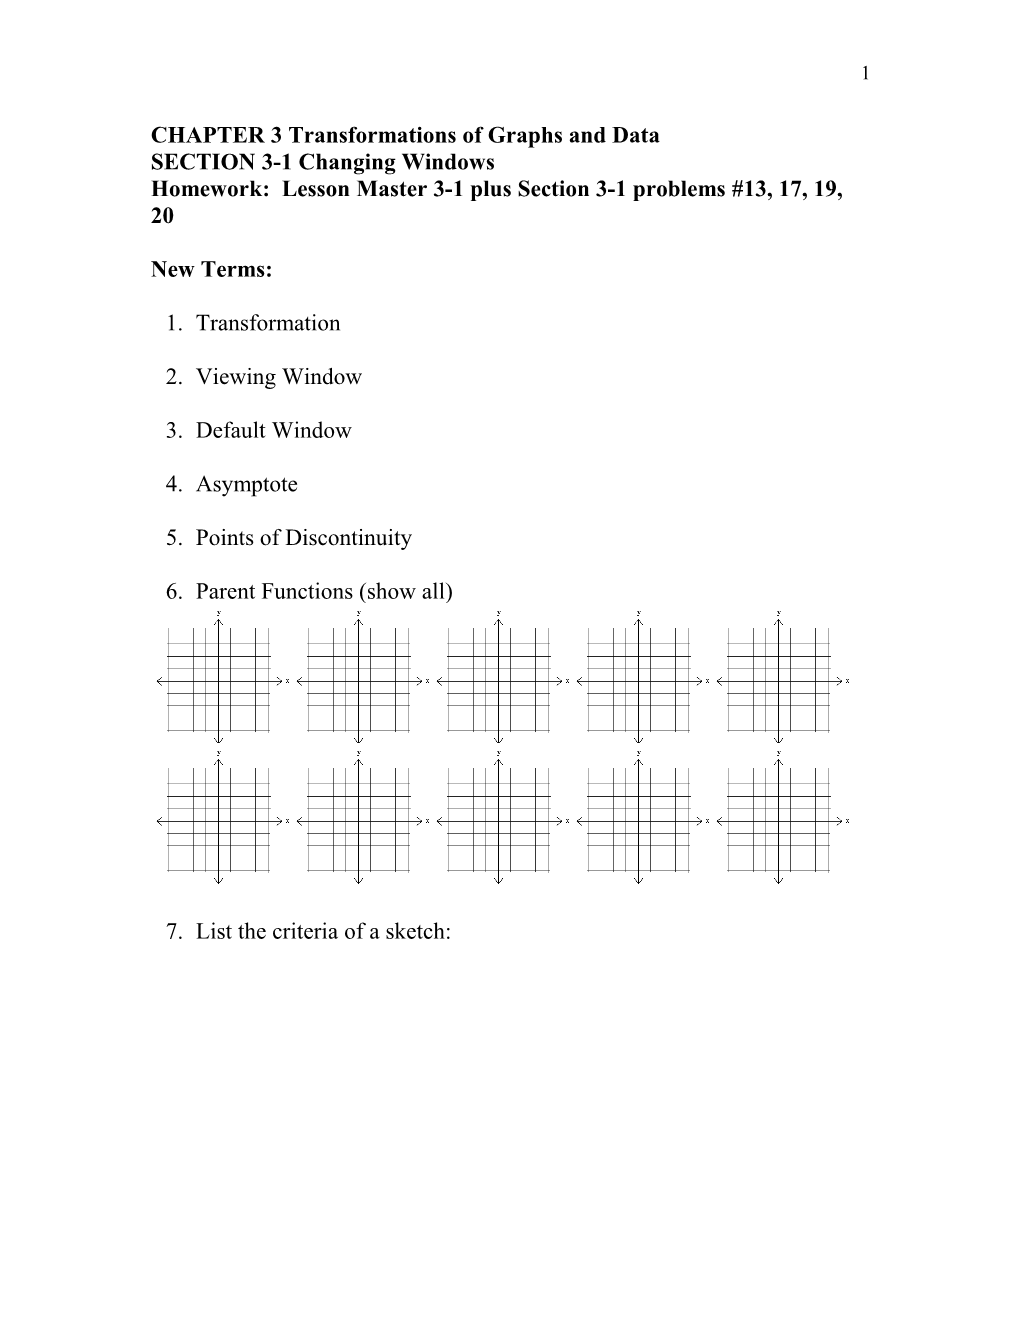 CHAPTER 3 Transformations of Graphs and Data